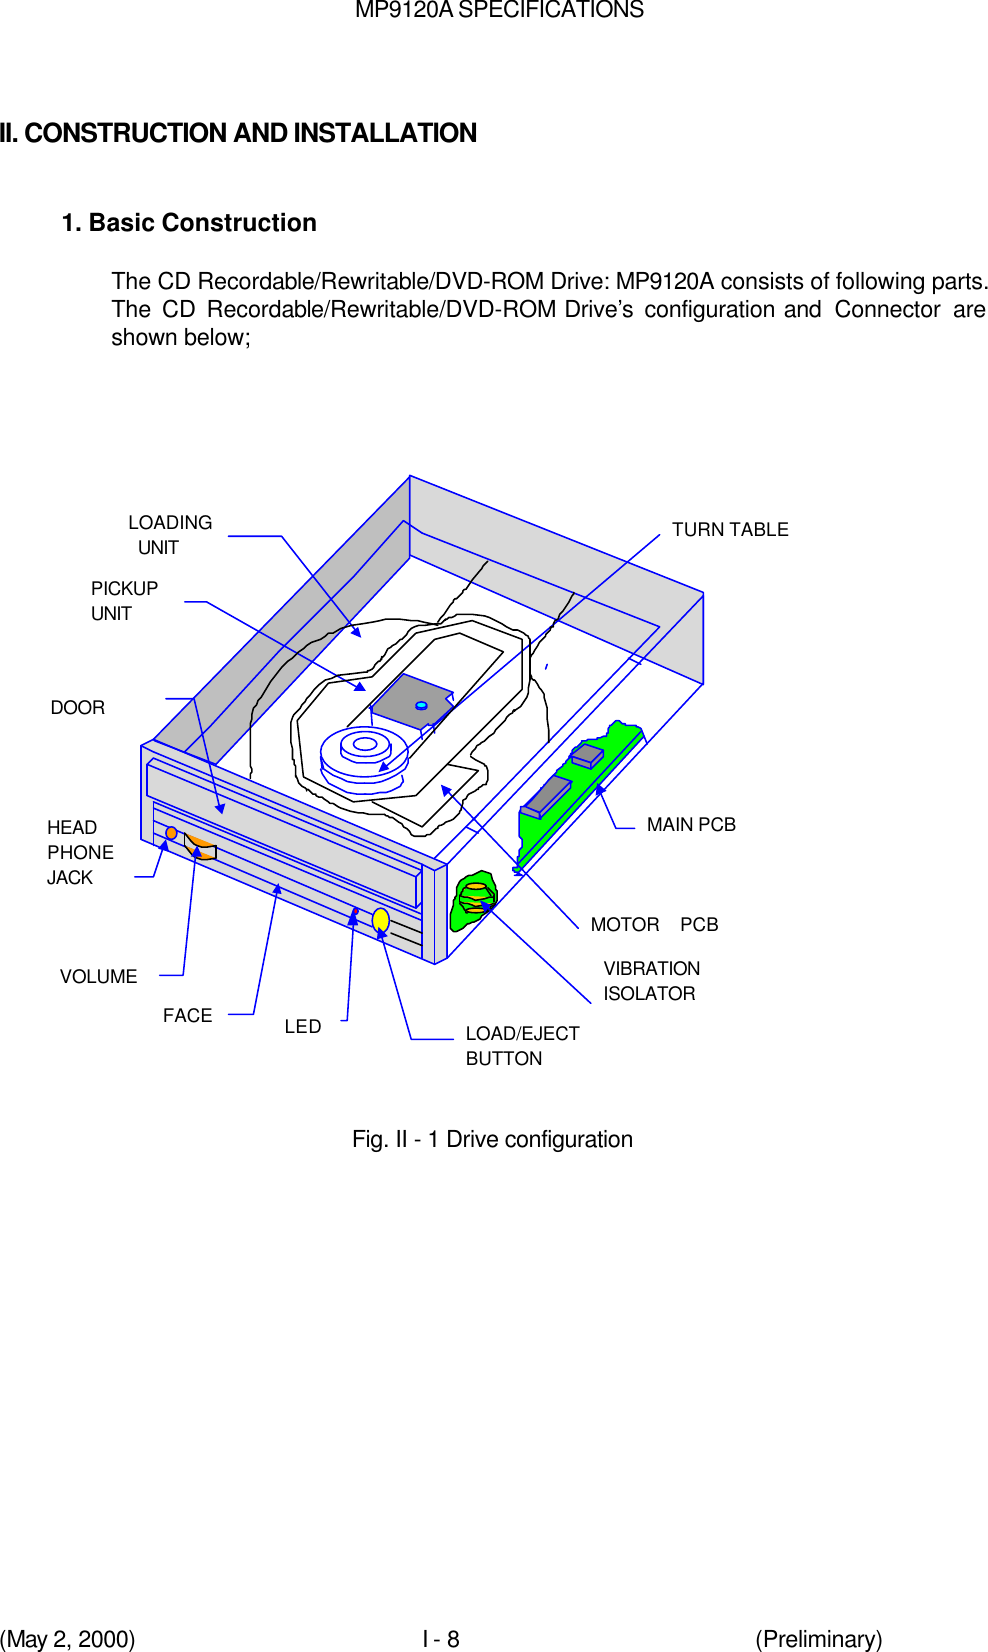 MP9120A SPECIFICATIONS(May 2, 2000)I - 8 (Preliminary)II. CONSTRUCTION AND INSTALLATION1. Basic ConstructionThe CD Recordable/Rewritable/DVD-ROM Drive: MP9120A consists of following parts.The CD Recordable/Rewritable/DVD-ROM Drive’s configuration and  Connector areshown below; MAIN PCBLOADING UNITTURN TABLEPICKUPUNIT FACE LOAD/EJECTBUTTONHEADPHONEJACKMOTOR PCB  LEDDOORVOLUME VIBRATIONISOLATORFig. II - 1 Drive configuration